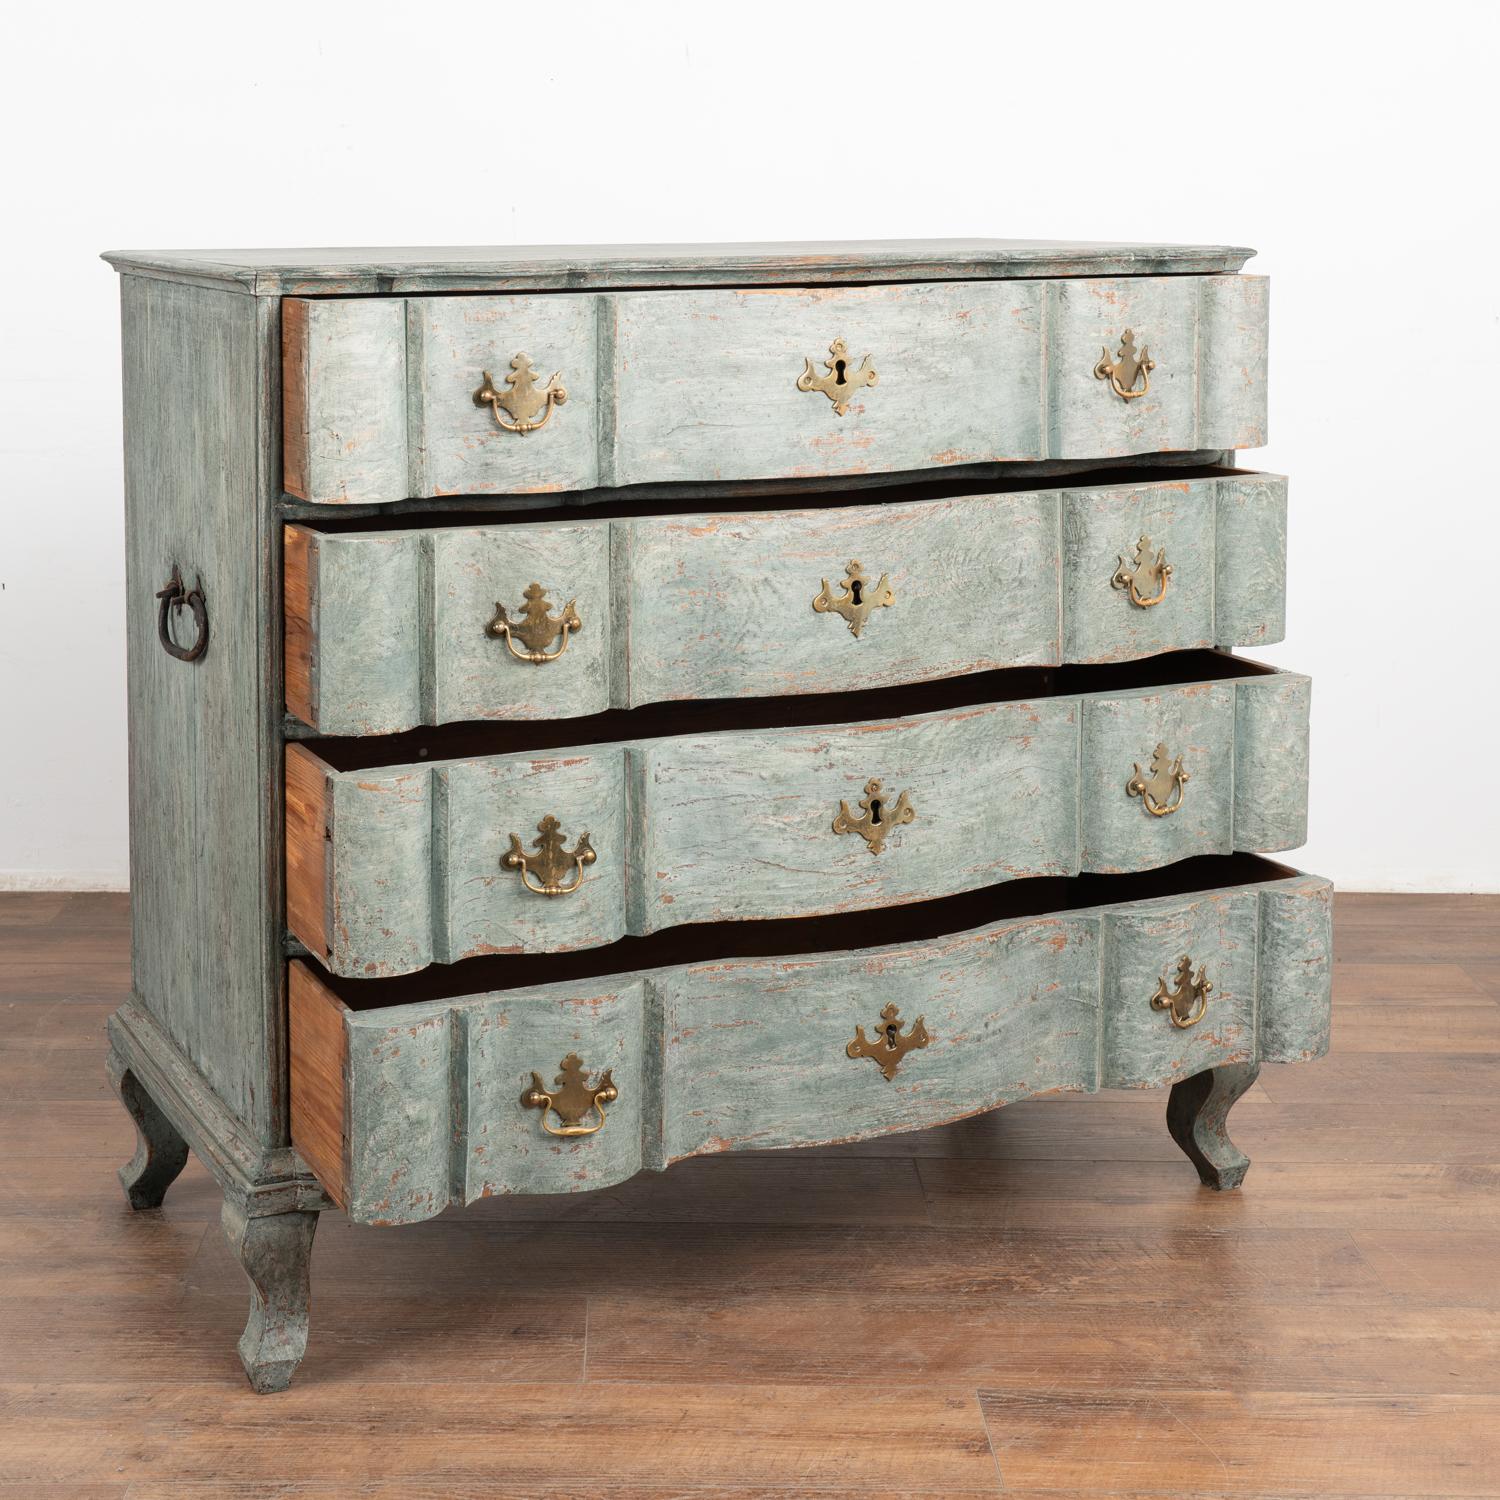 Danish Blue Painted Oak Rococo Chest of Four Drawers, Denmark circa 1770-80 For Sale